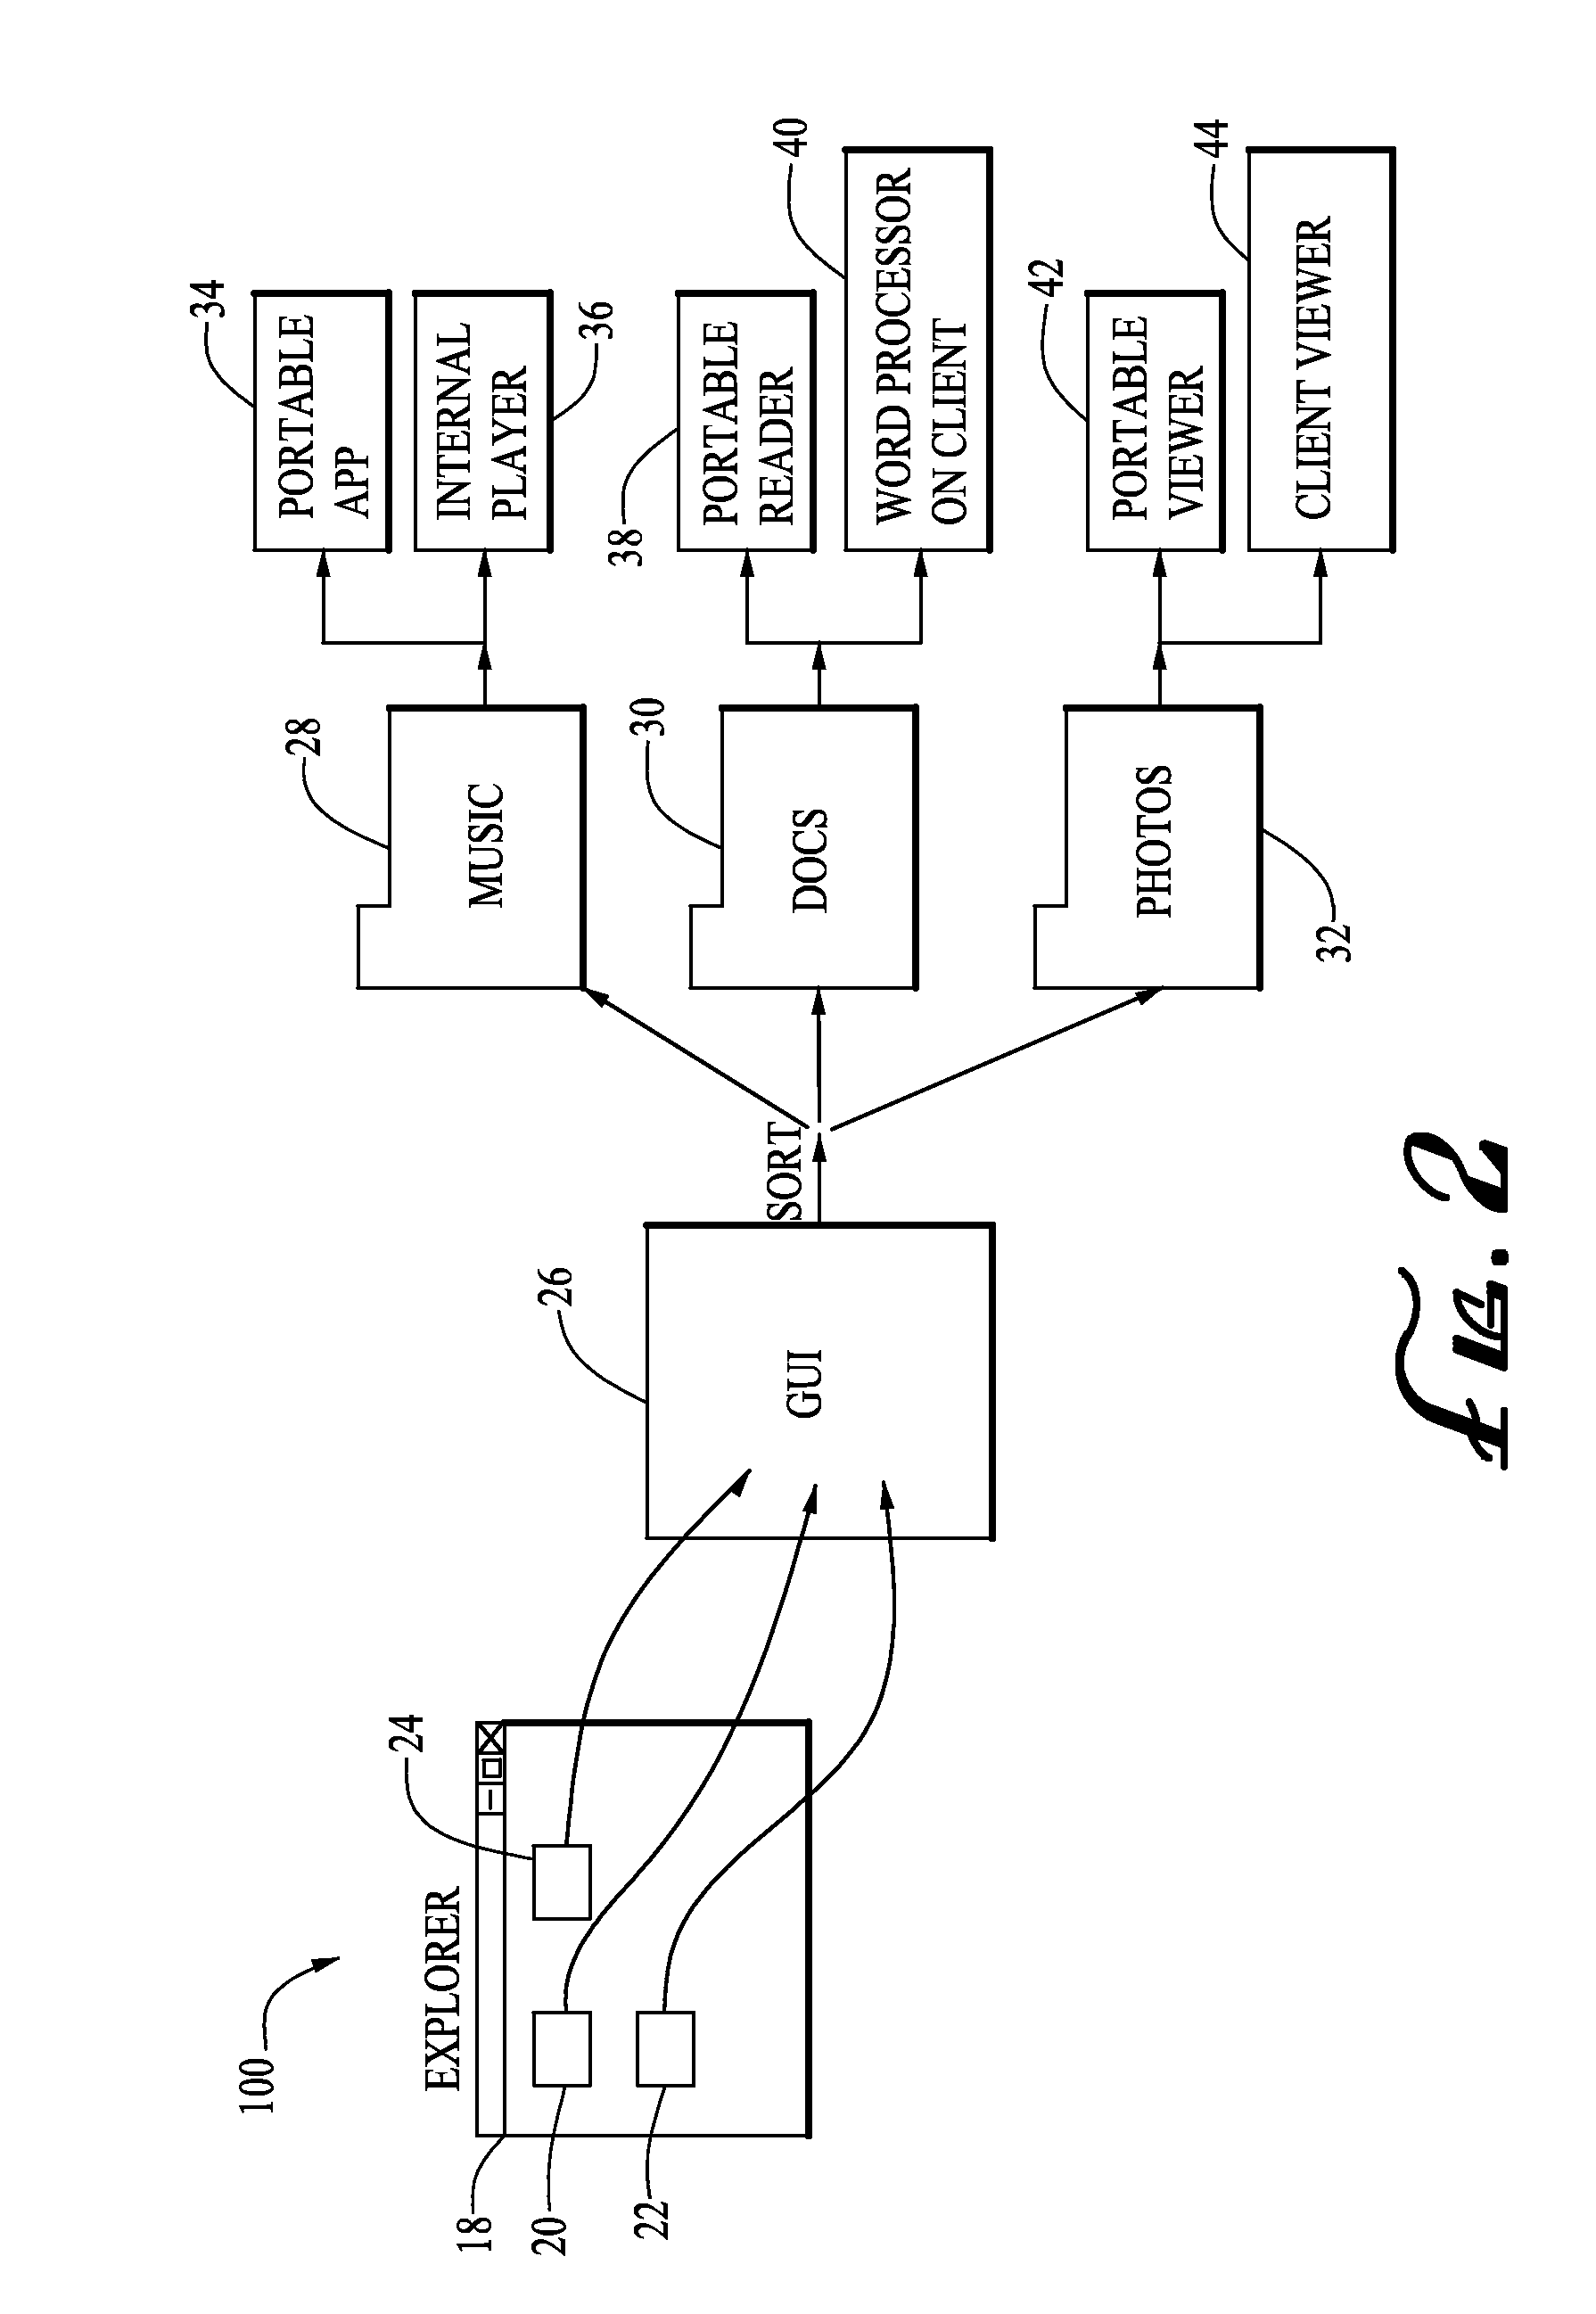 Portable memory device operating system and method of using same